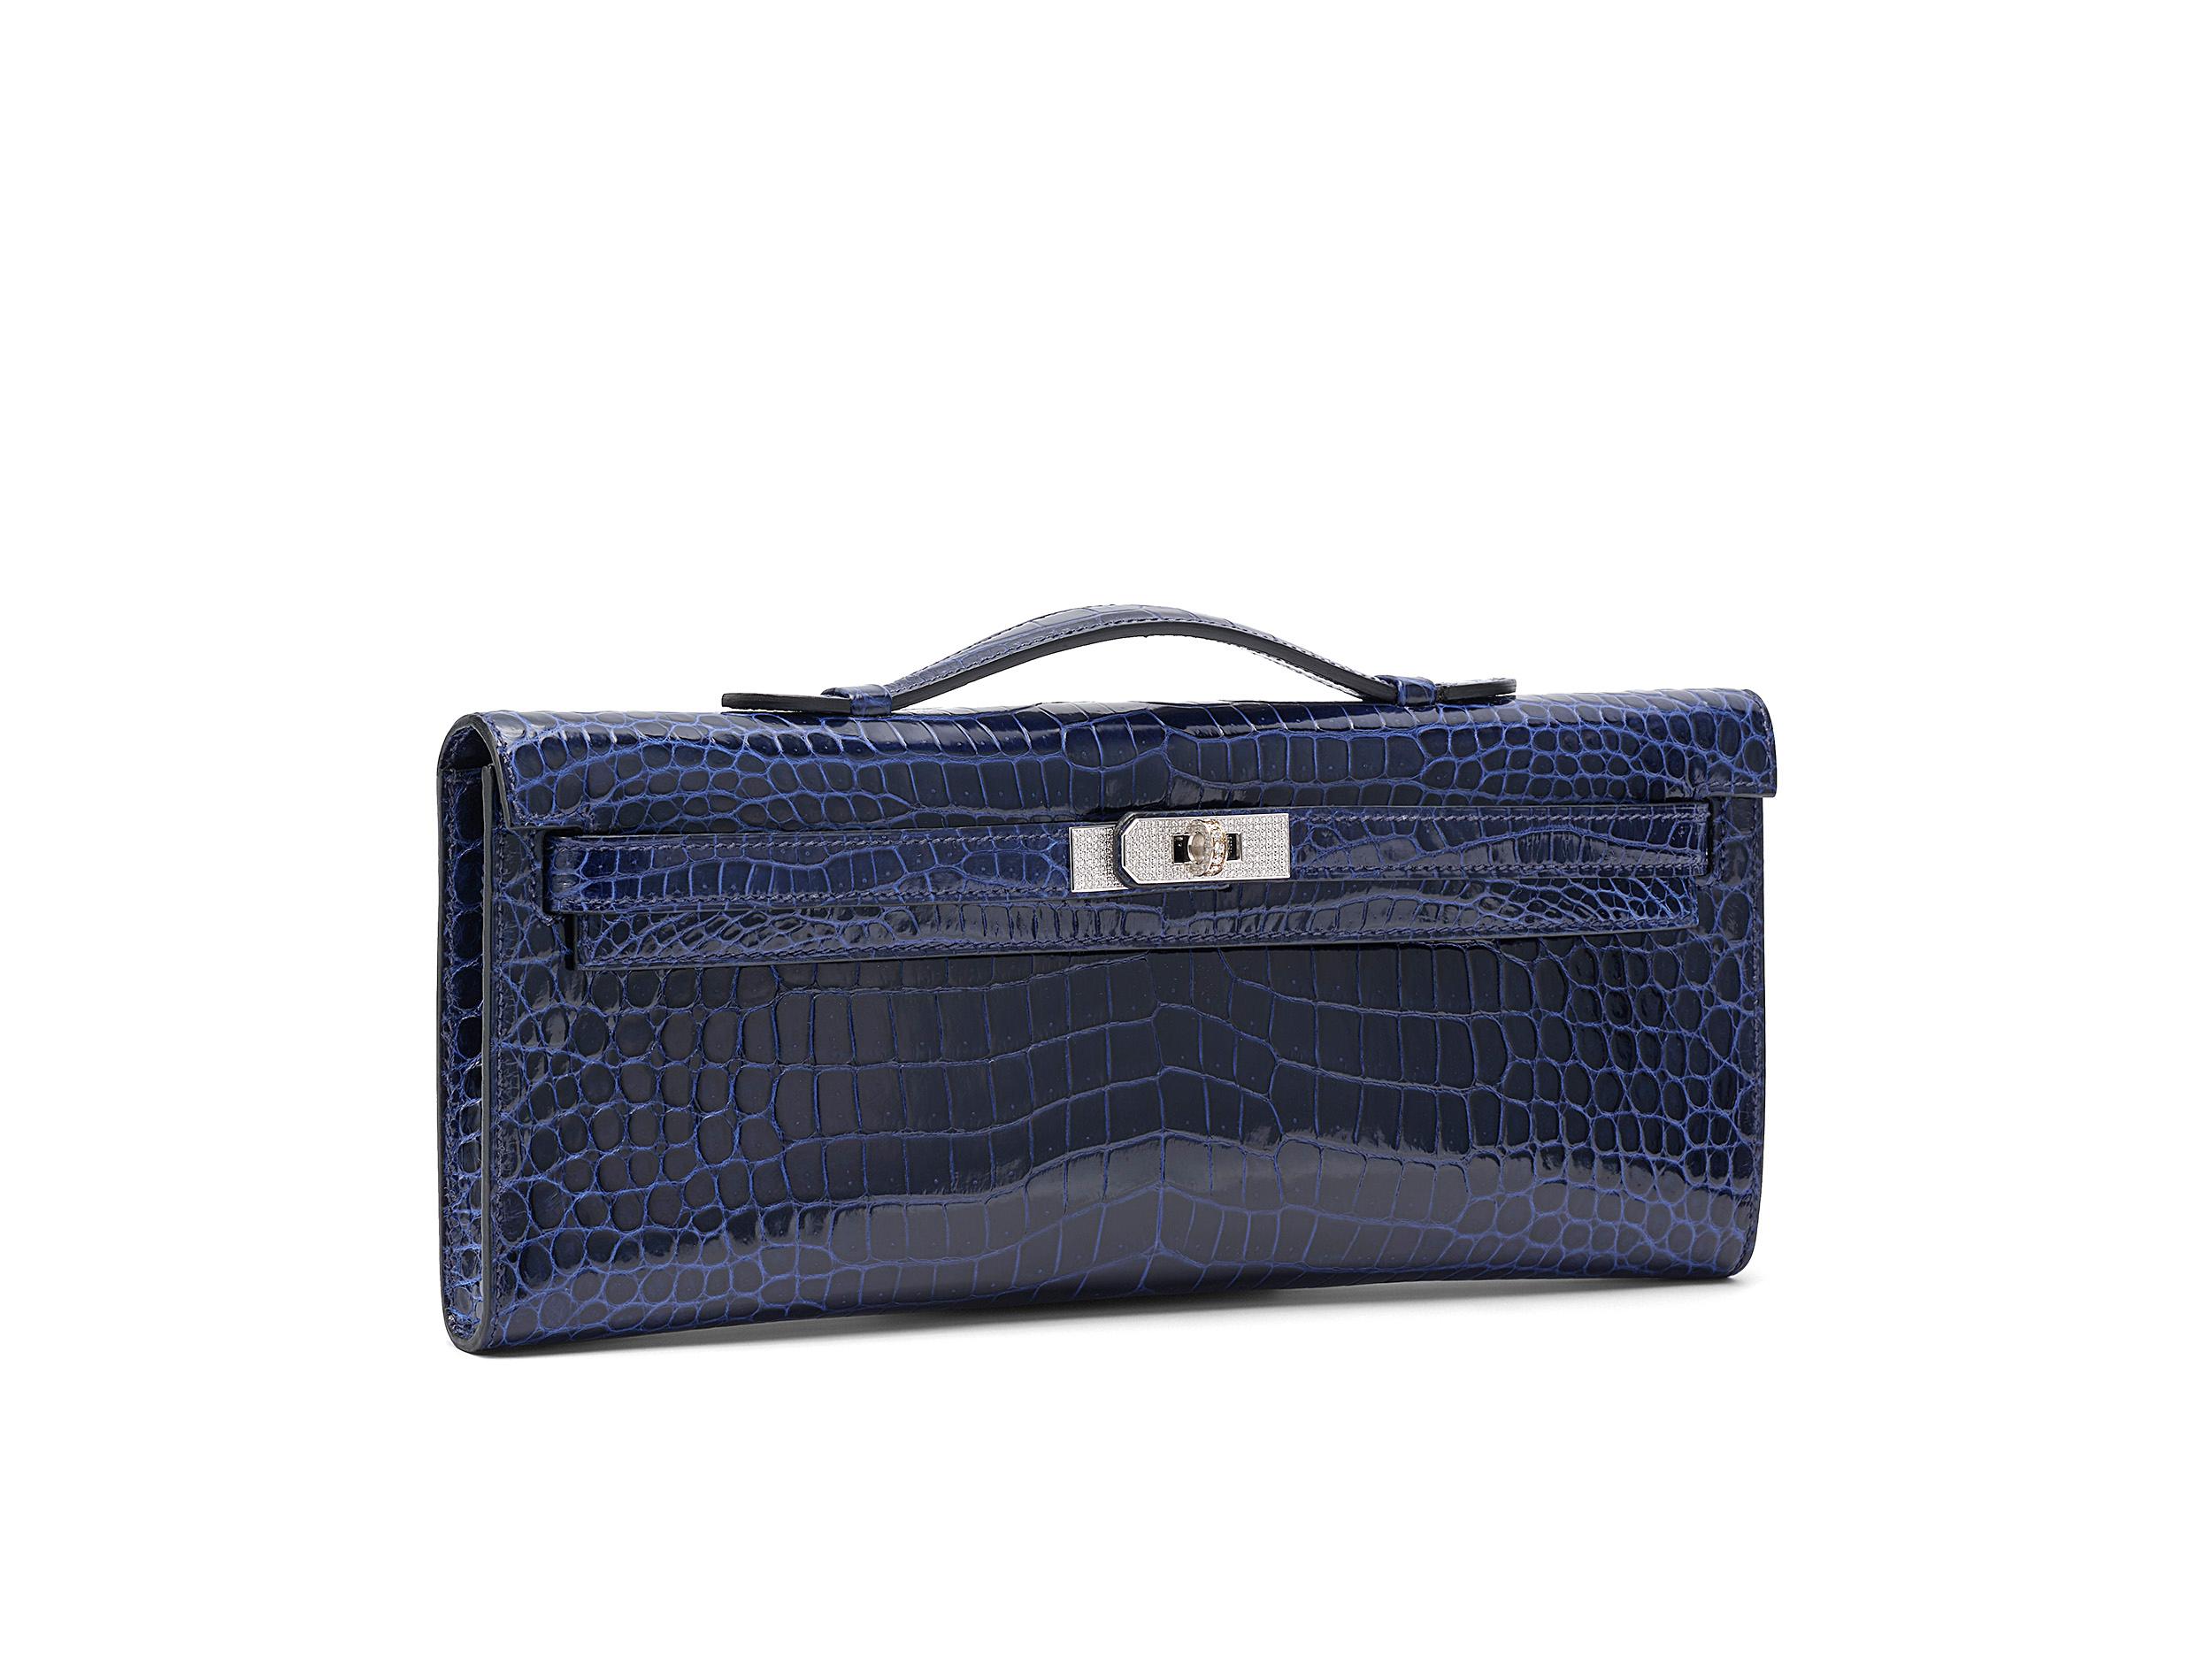 Hermès Kelly Cut in bleu saphir and shiny porosus crocodile leather. The hardware is set with diamonds, but does not come from Hermès. The original Hermès hardware is included and can be replaced. The bag is in very good condition, there are only